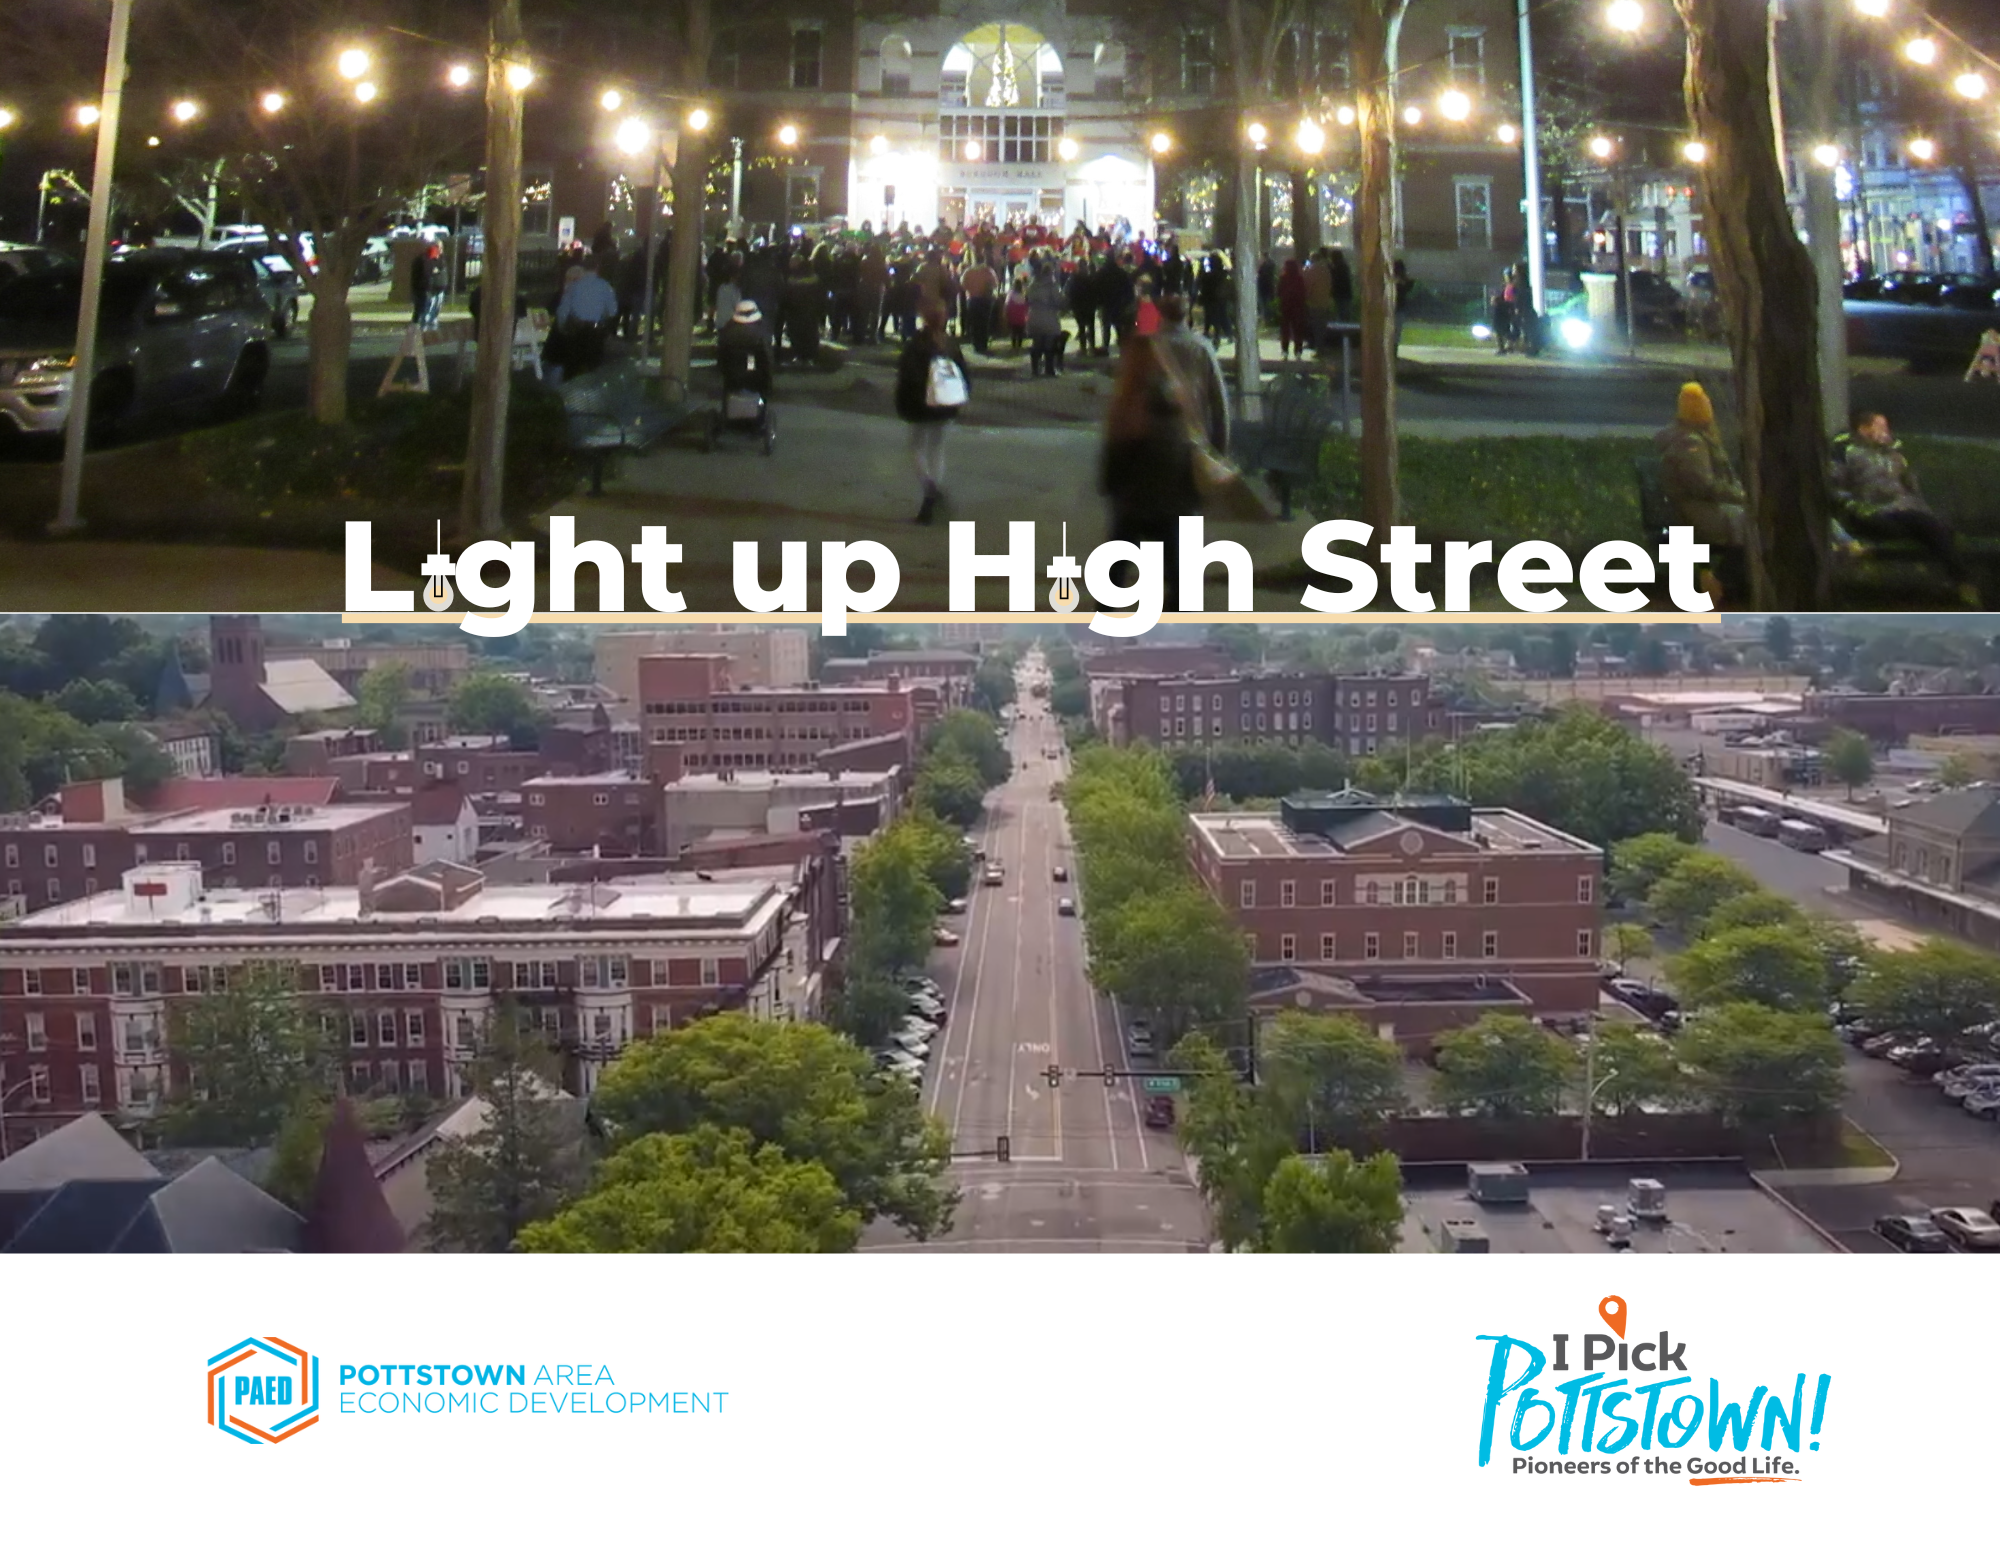 Call for Electrician/Contractor: PAED releases RFP for “Light Up High Street” Project